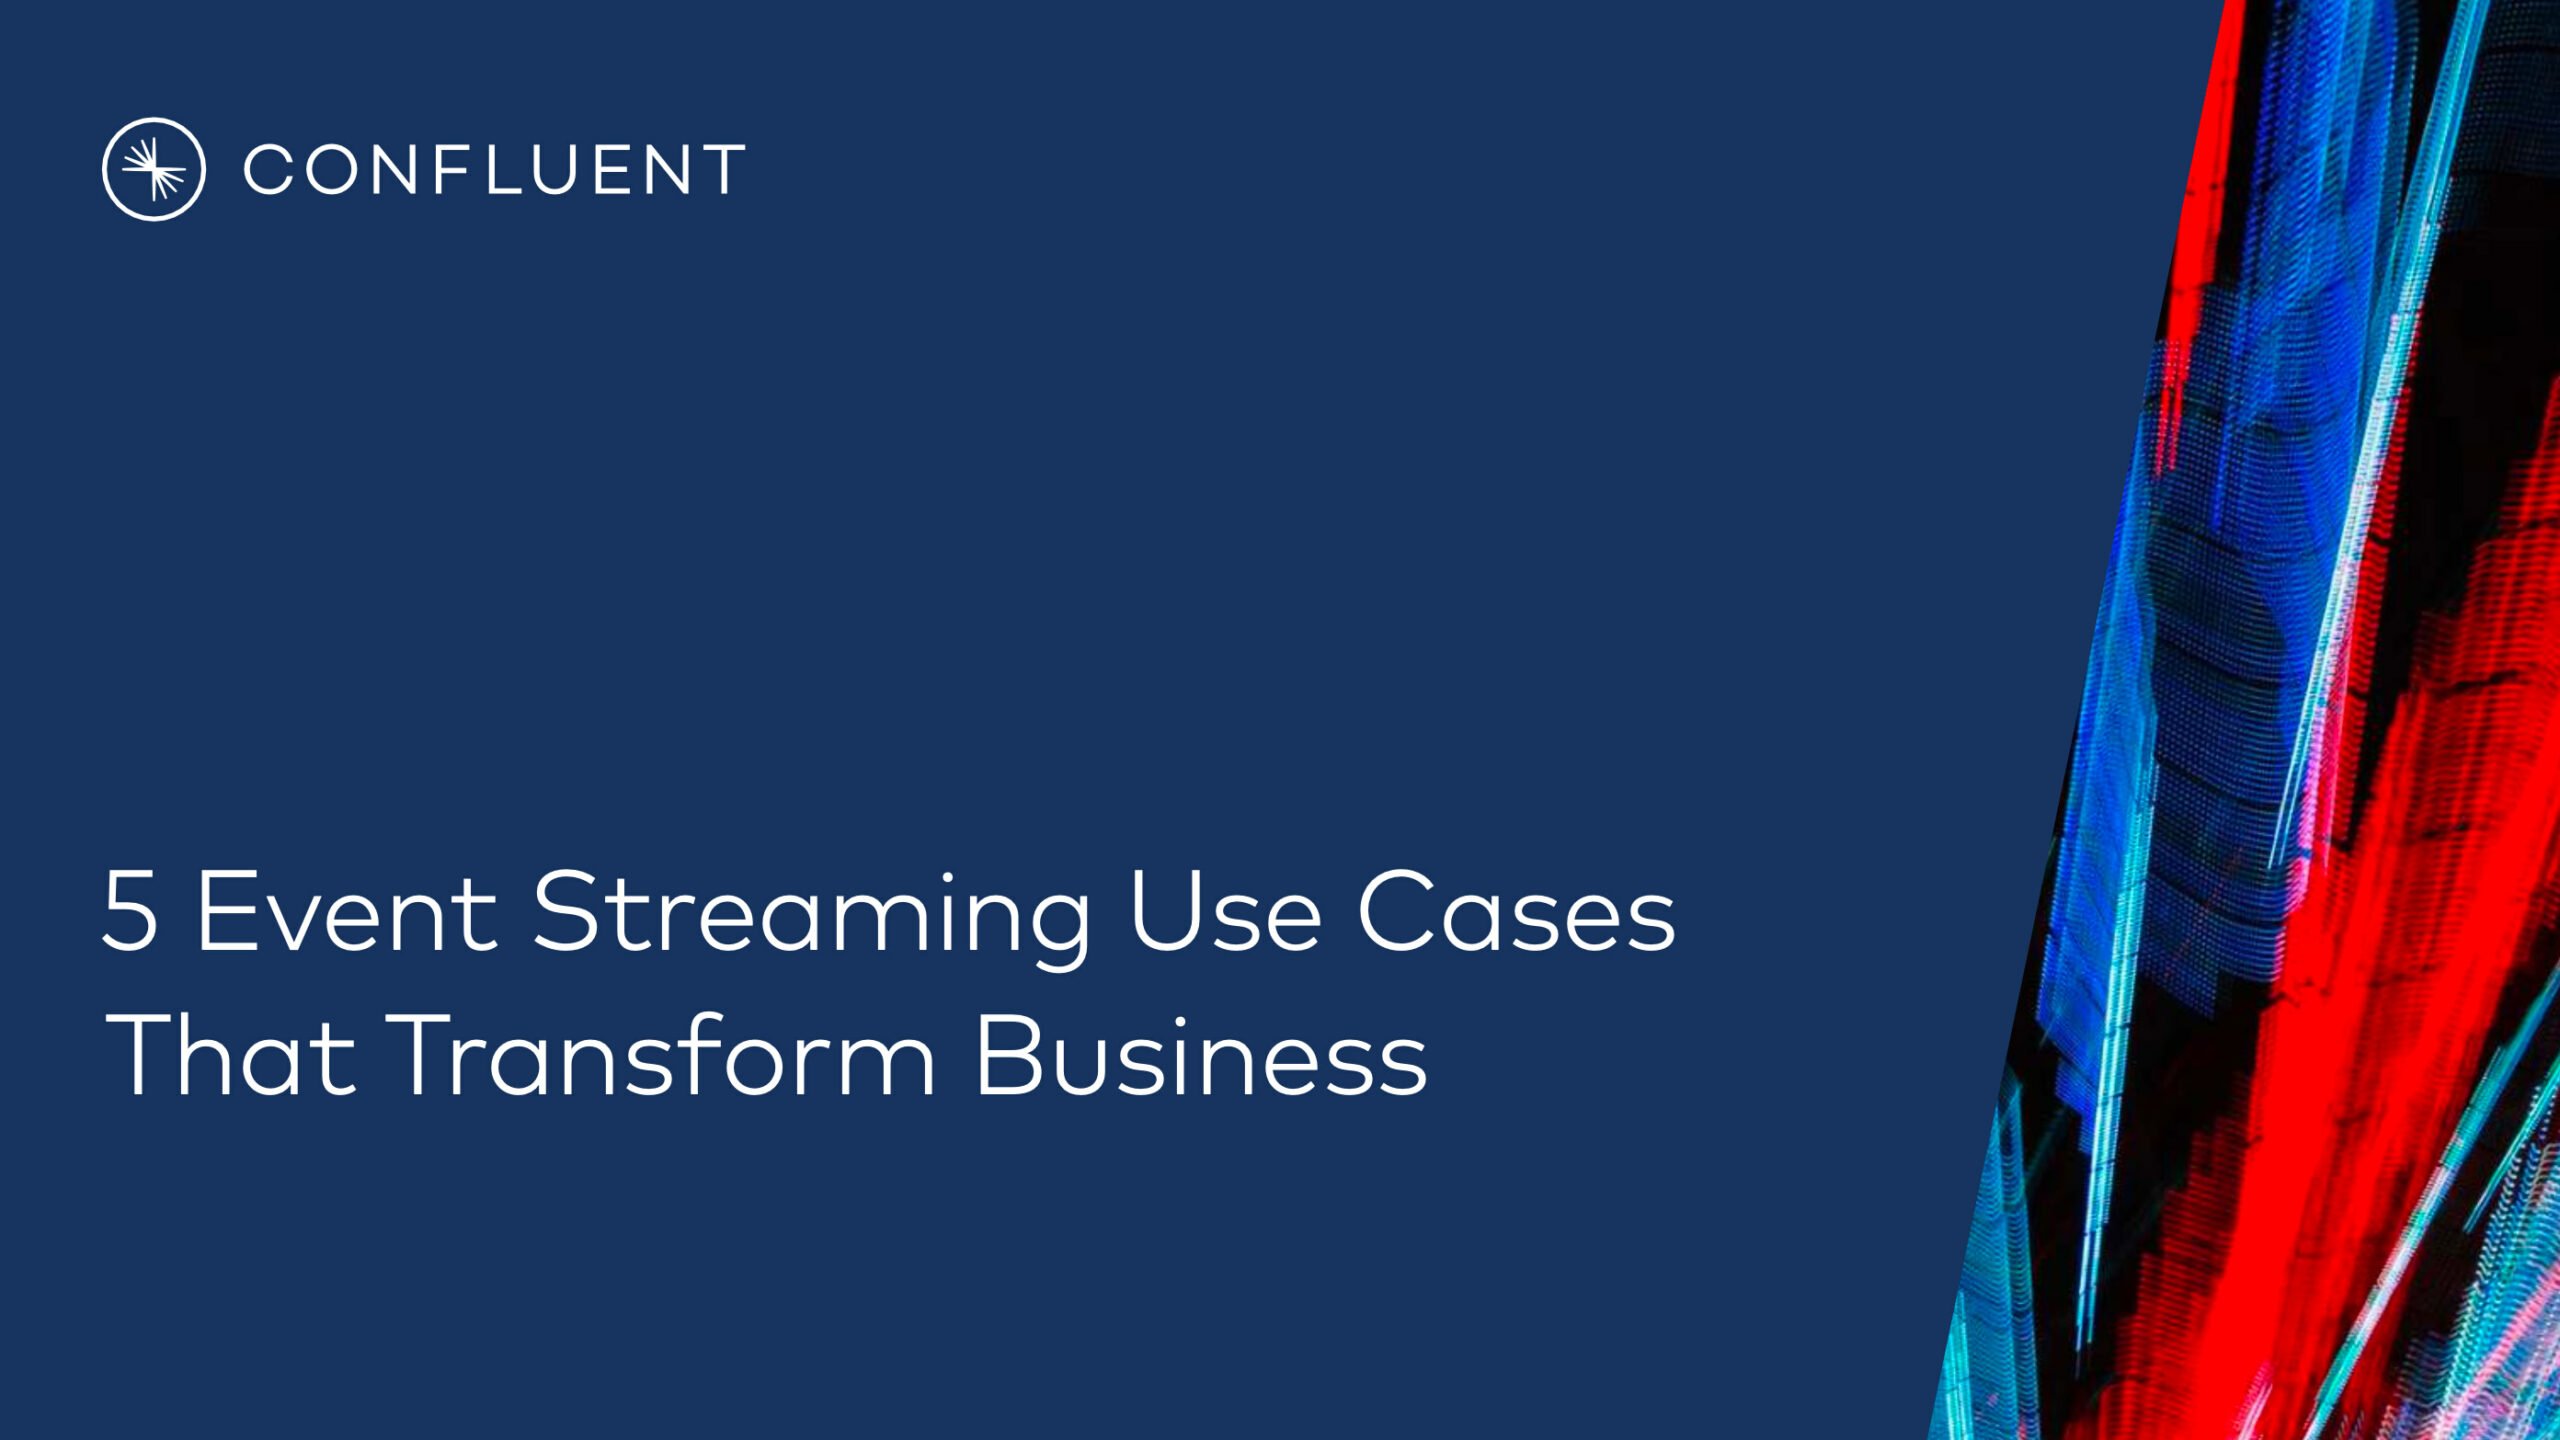 Five Event Streaming use cases that Transform Business